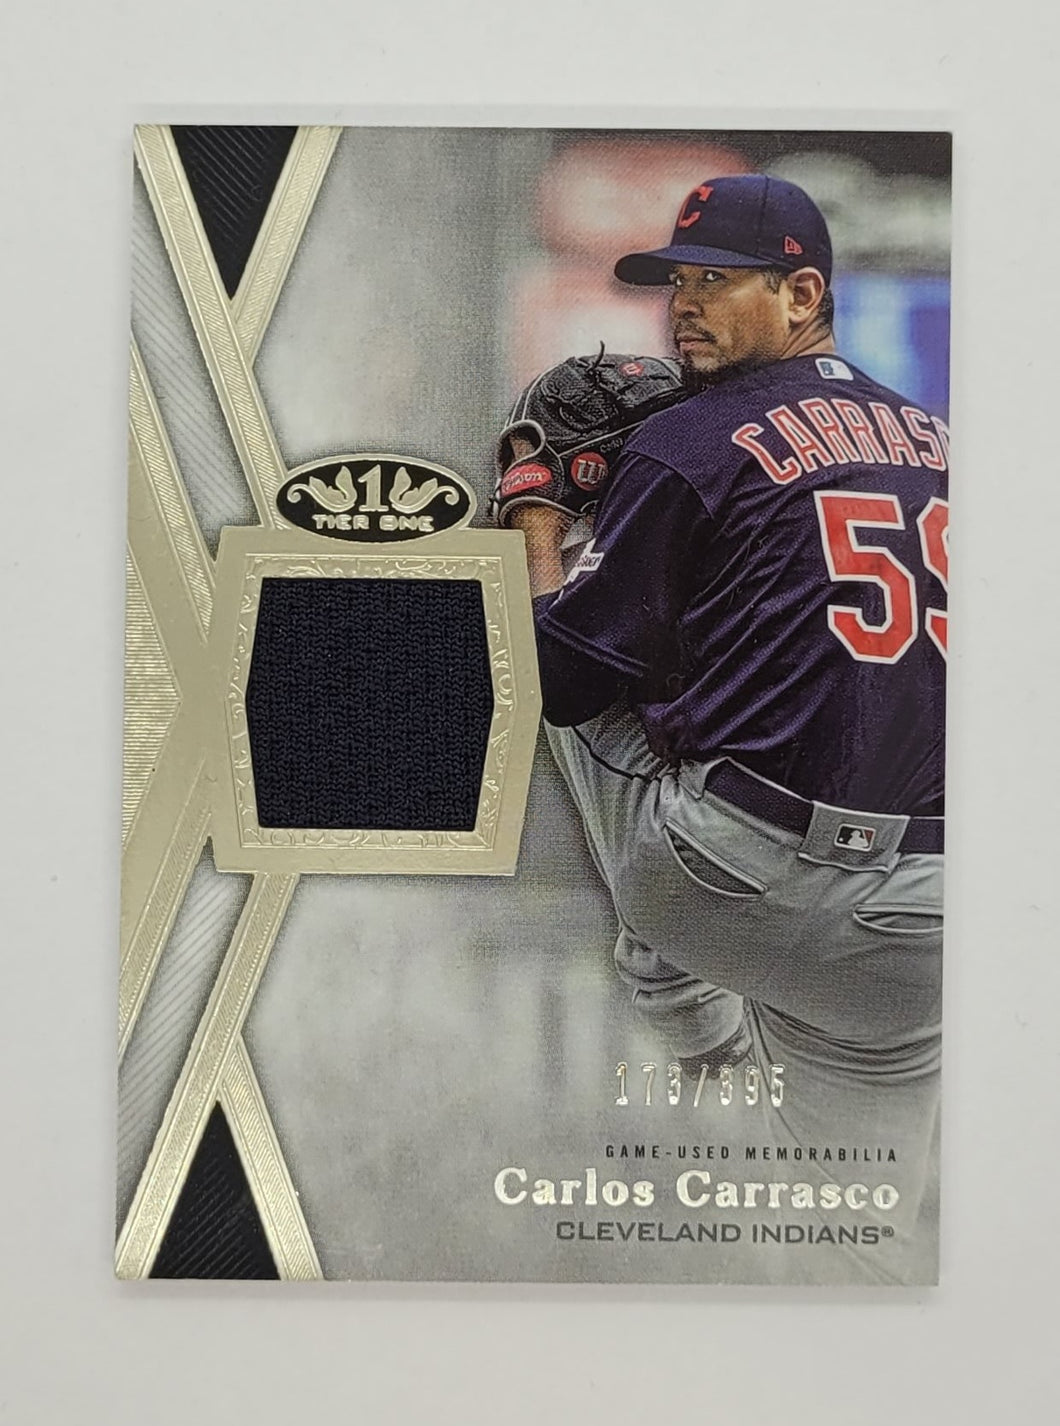 2020 Topps Tier One Carlos Carrasco Game Used Relic Baseball Card 173/395